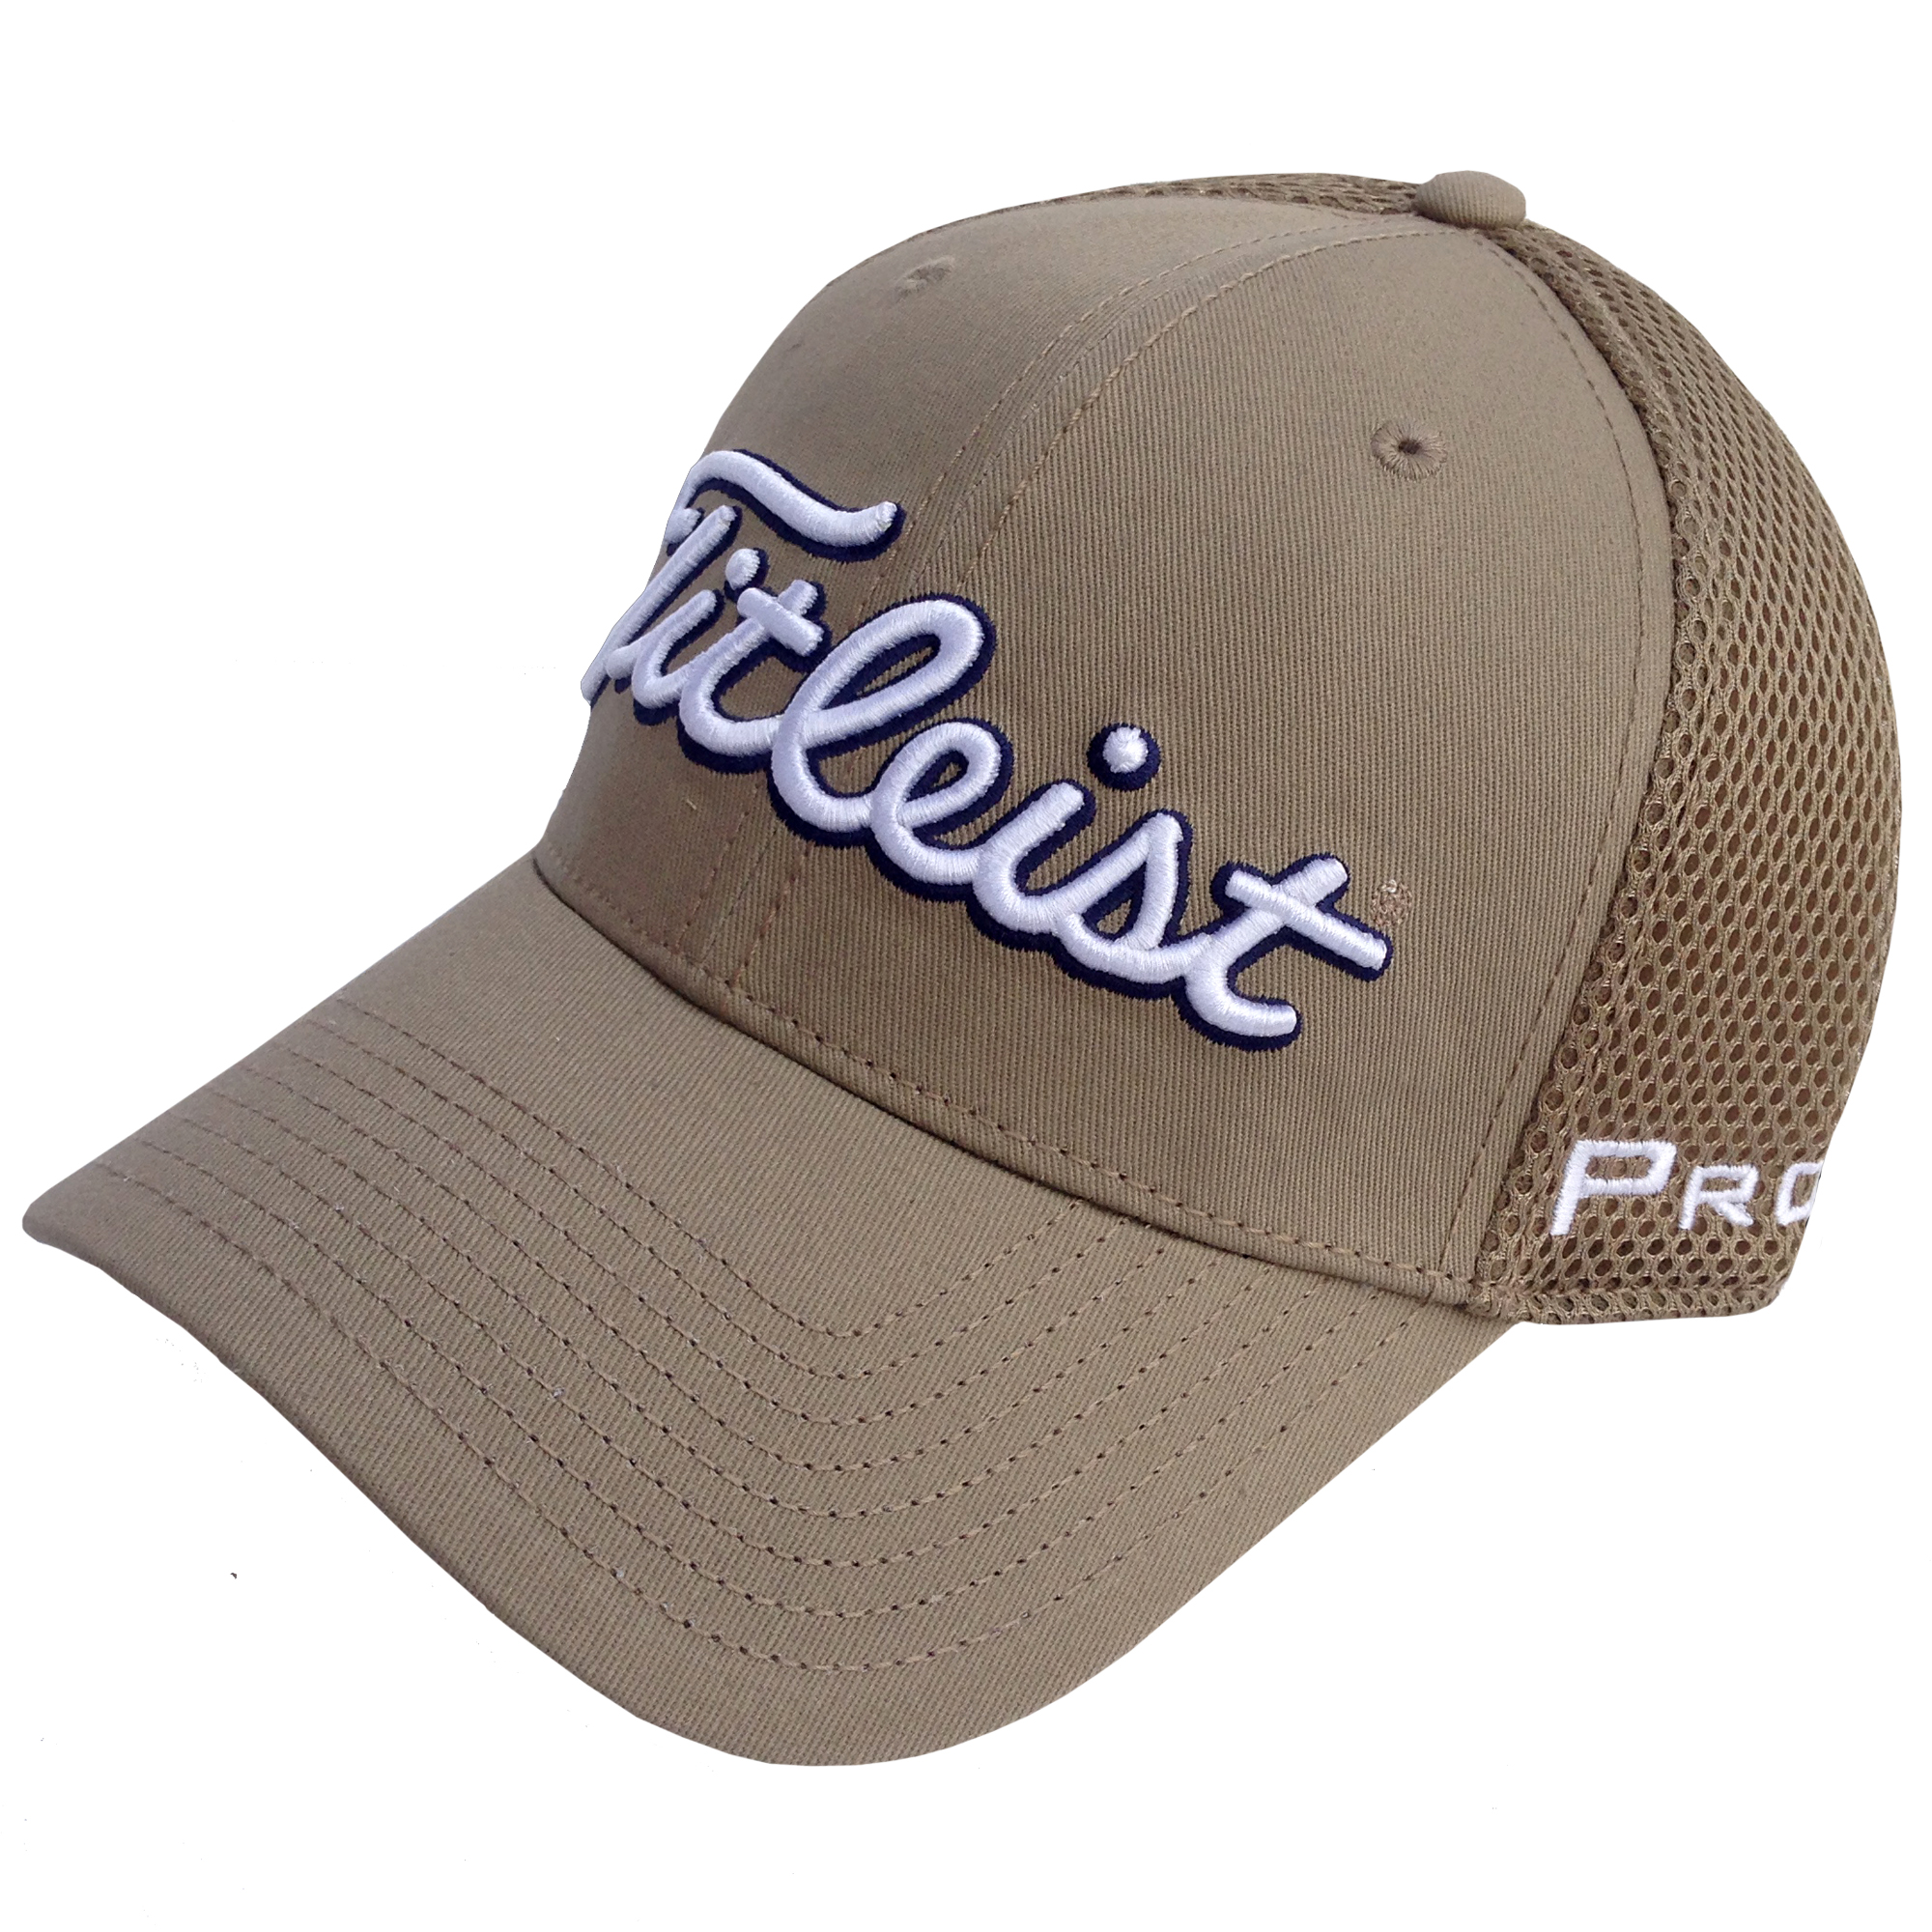 New 2015 Titleist Sports Mesh Structured Fitted Hat COLOR: Khaki SIZE ...